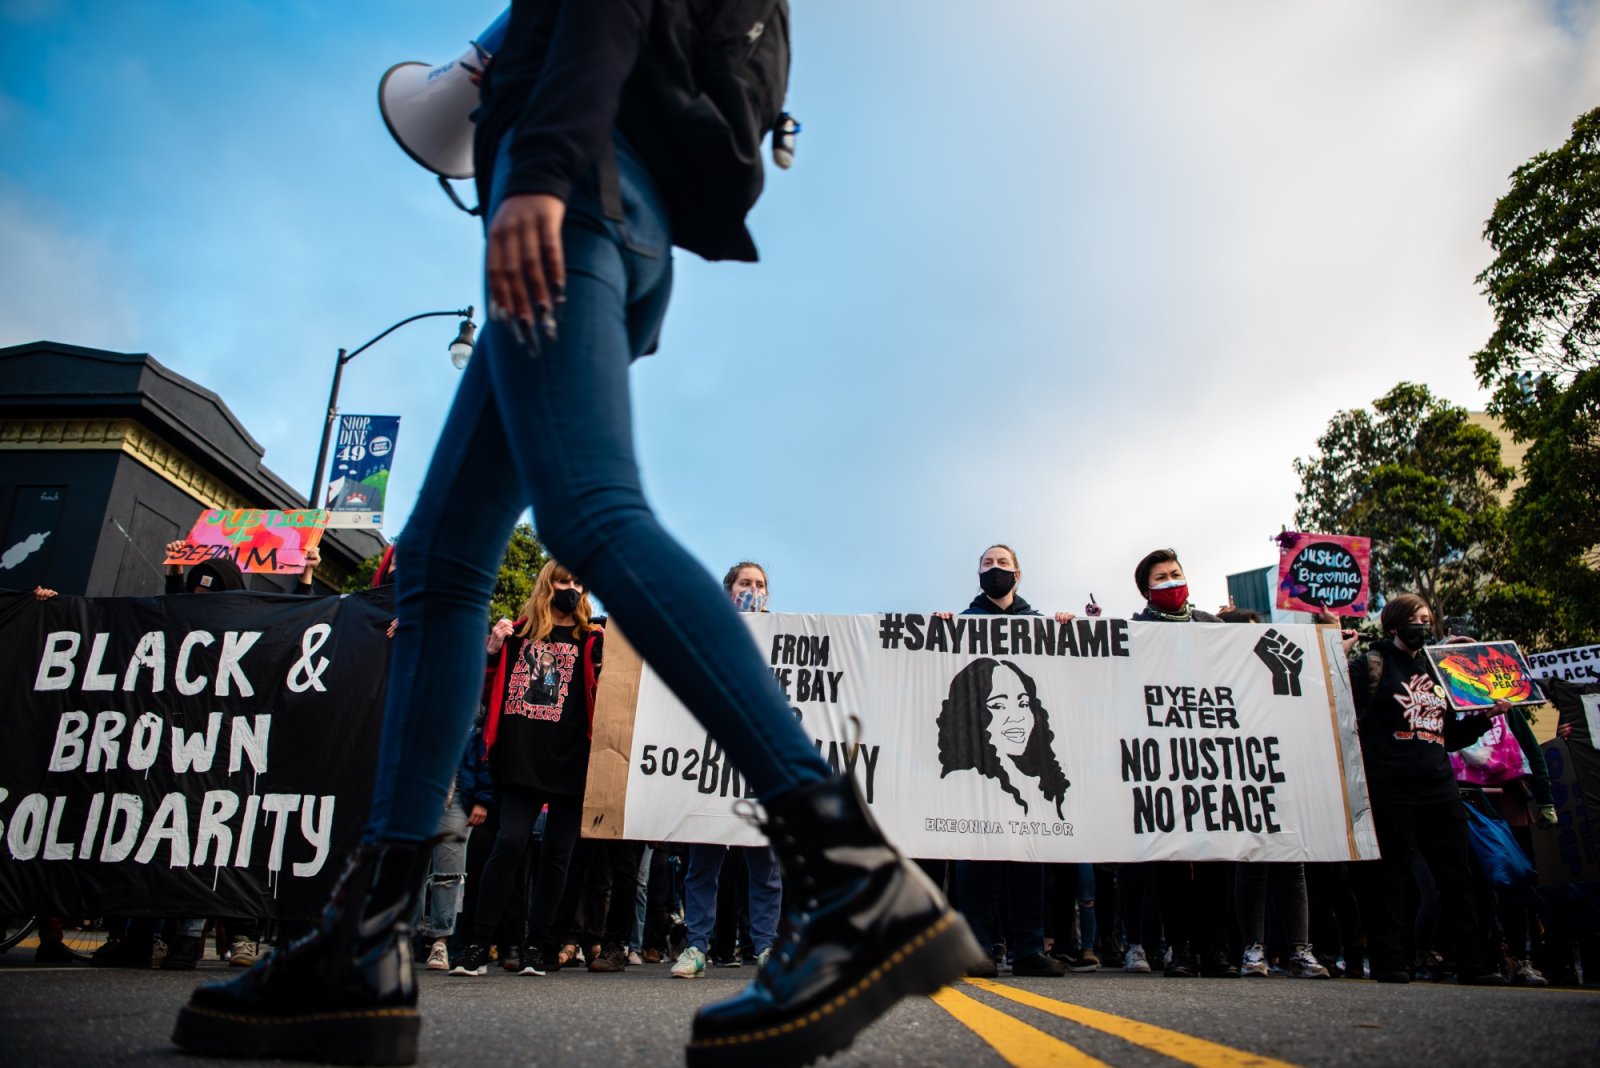 The scene is of a protest in the middle of the street with the view angled from the street level. A person speaking into a microphone is walking across the photo and behind them is a sea of people holding a white banner that says No justice, no peace and #sayhername. Another black sign on the left says in large white lettering Black and Brown solidarity